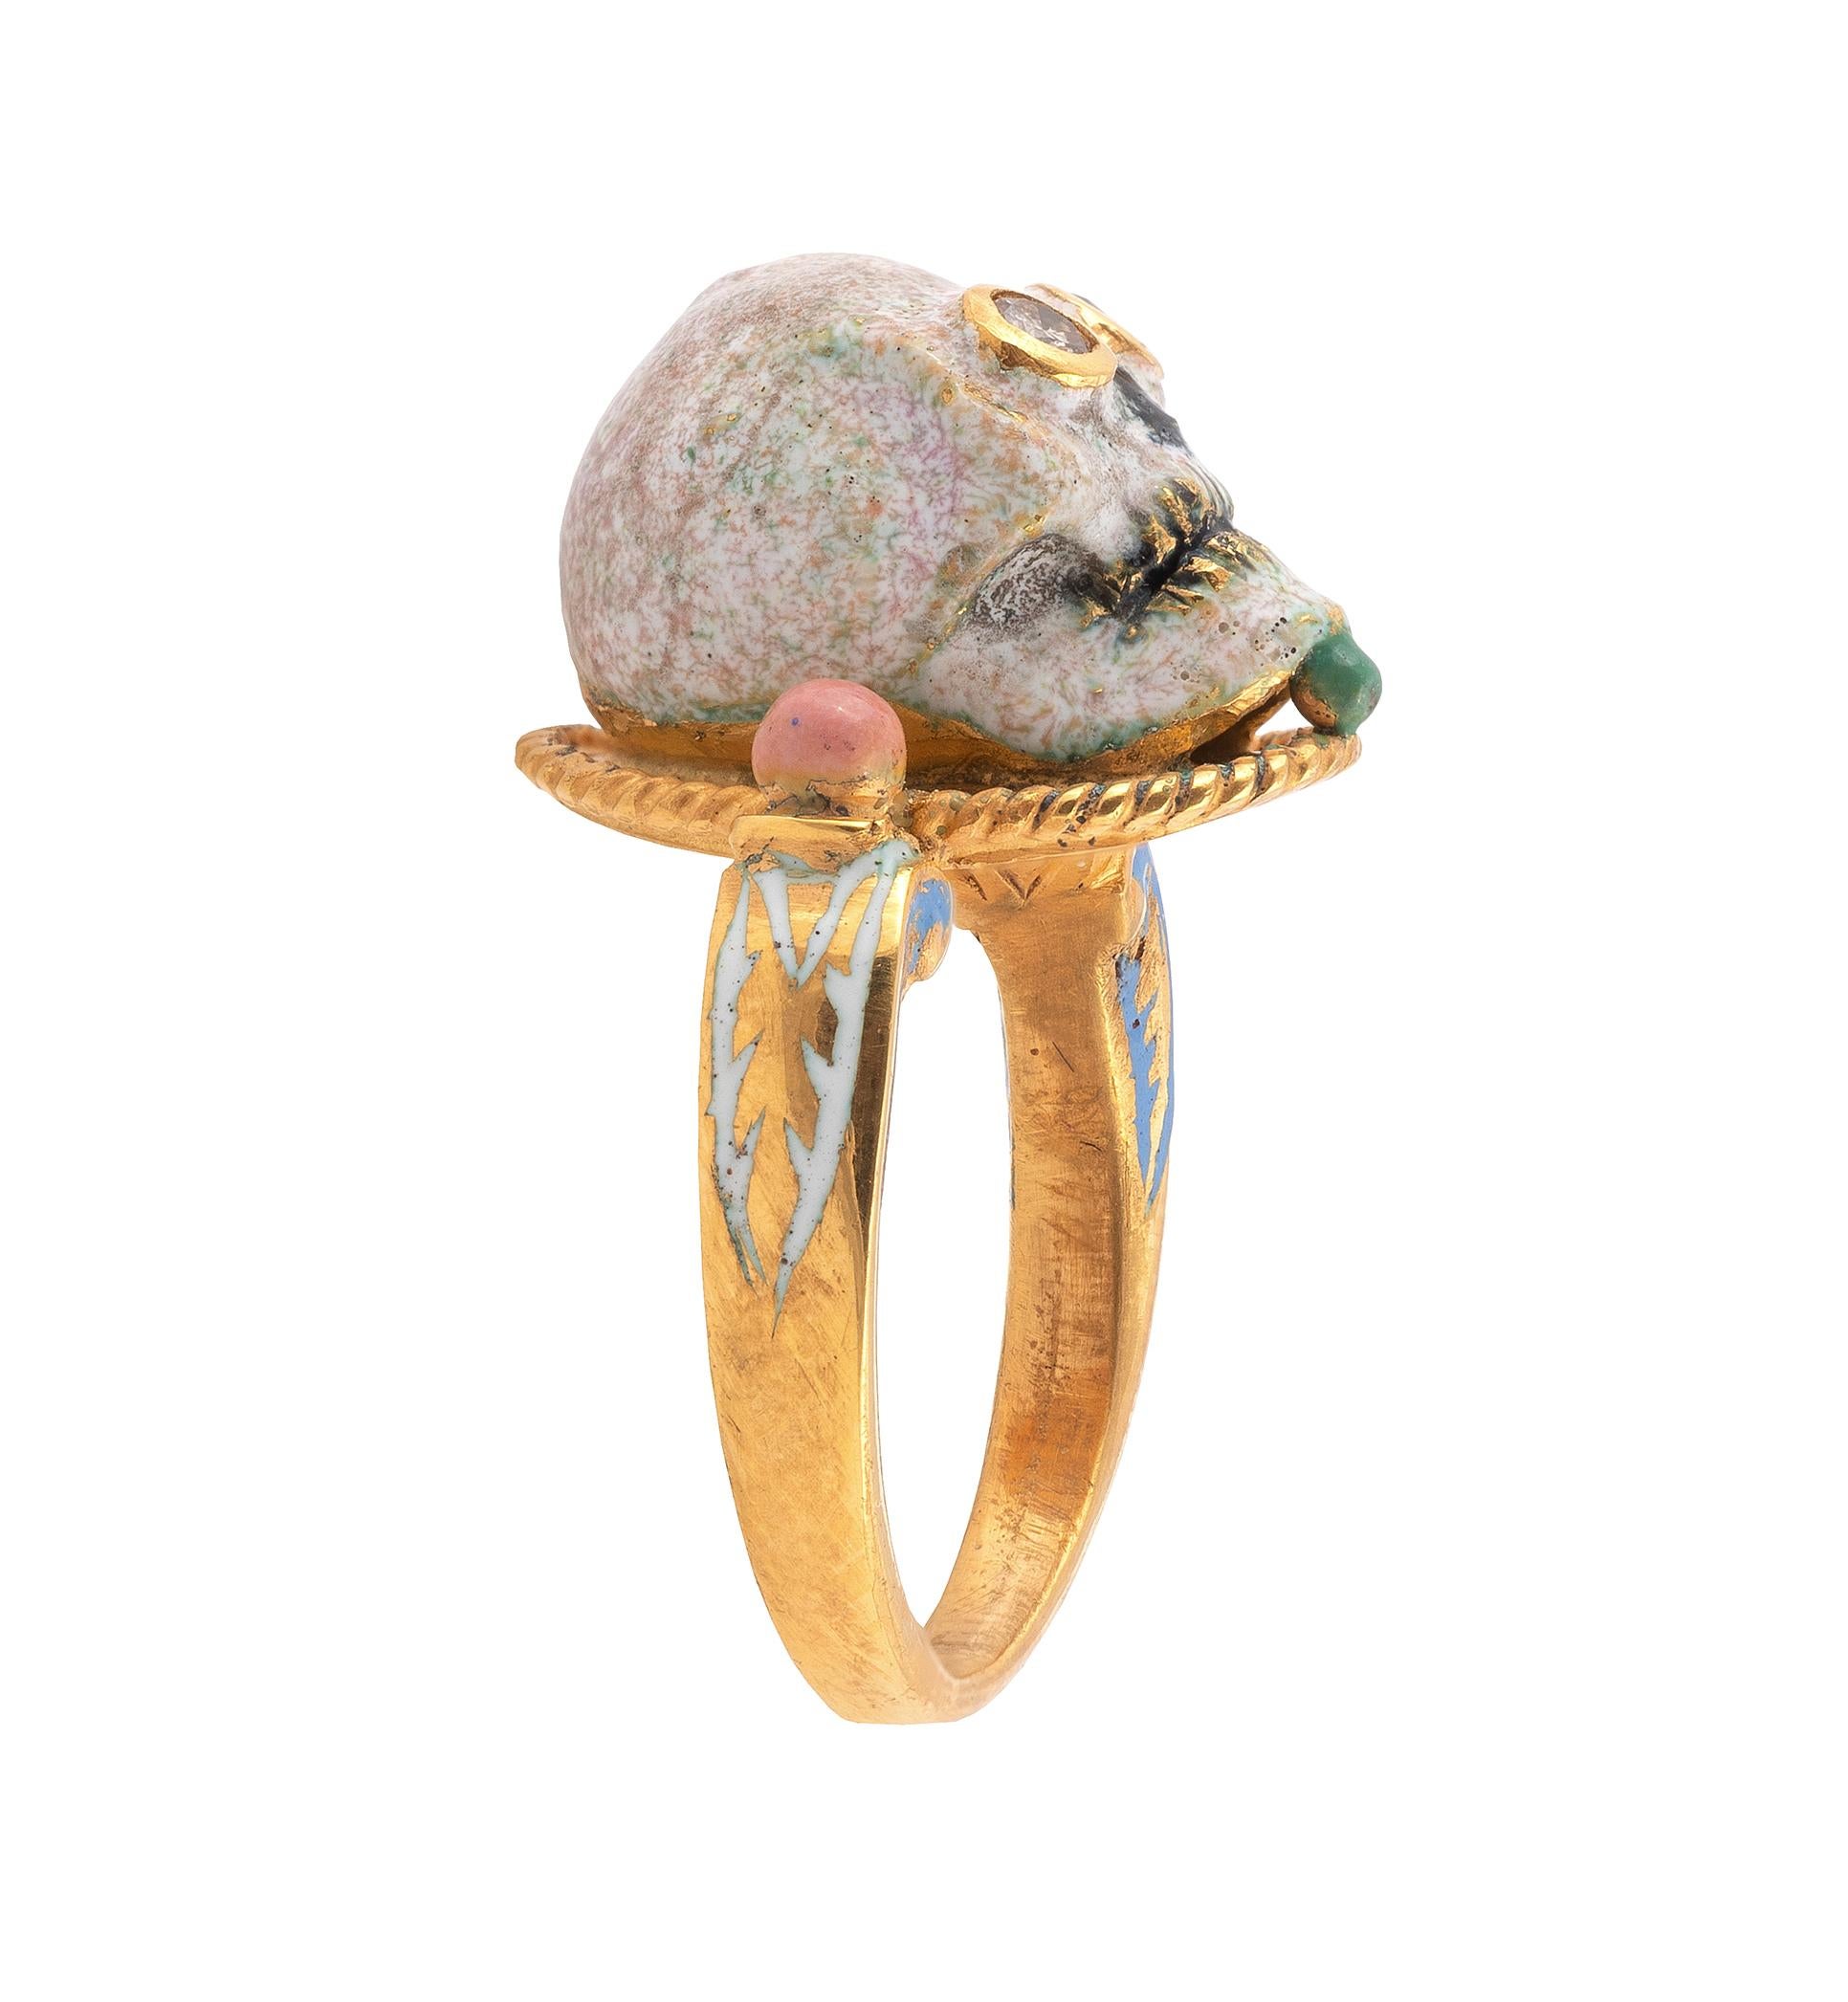 Renaissance style Memento Mori skull ring made with champleve multicolored enamels.
Mounted in 18Kt gold Signed A. Codognato Venezia Weight: 12 gr Finger size: 7 1/4